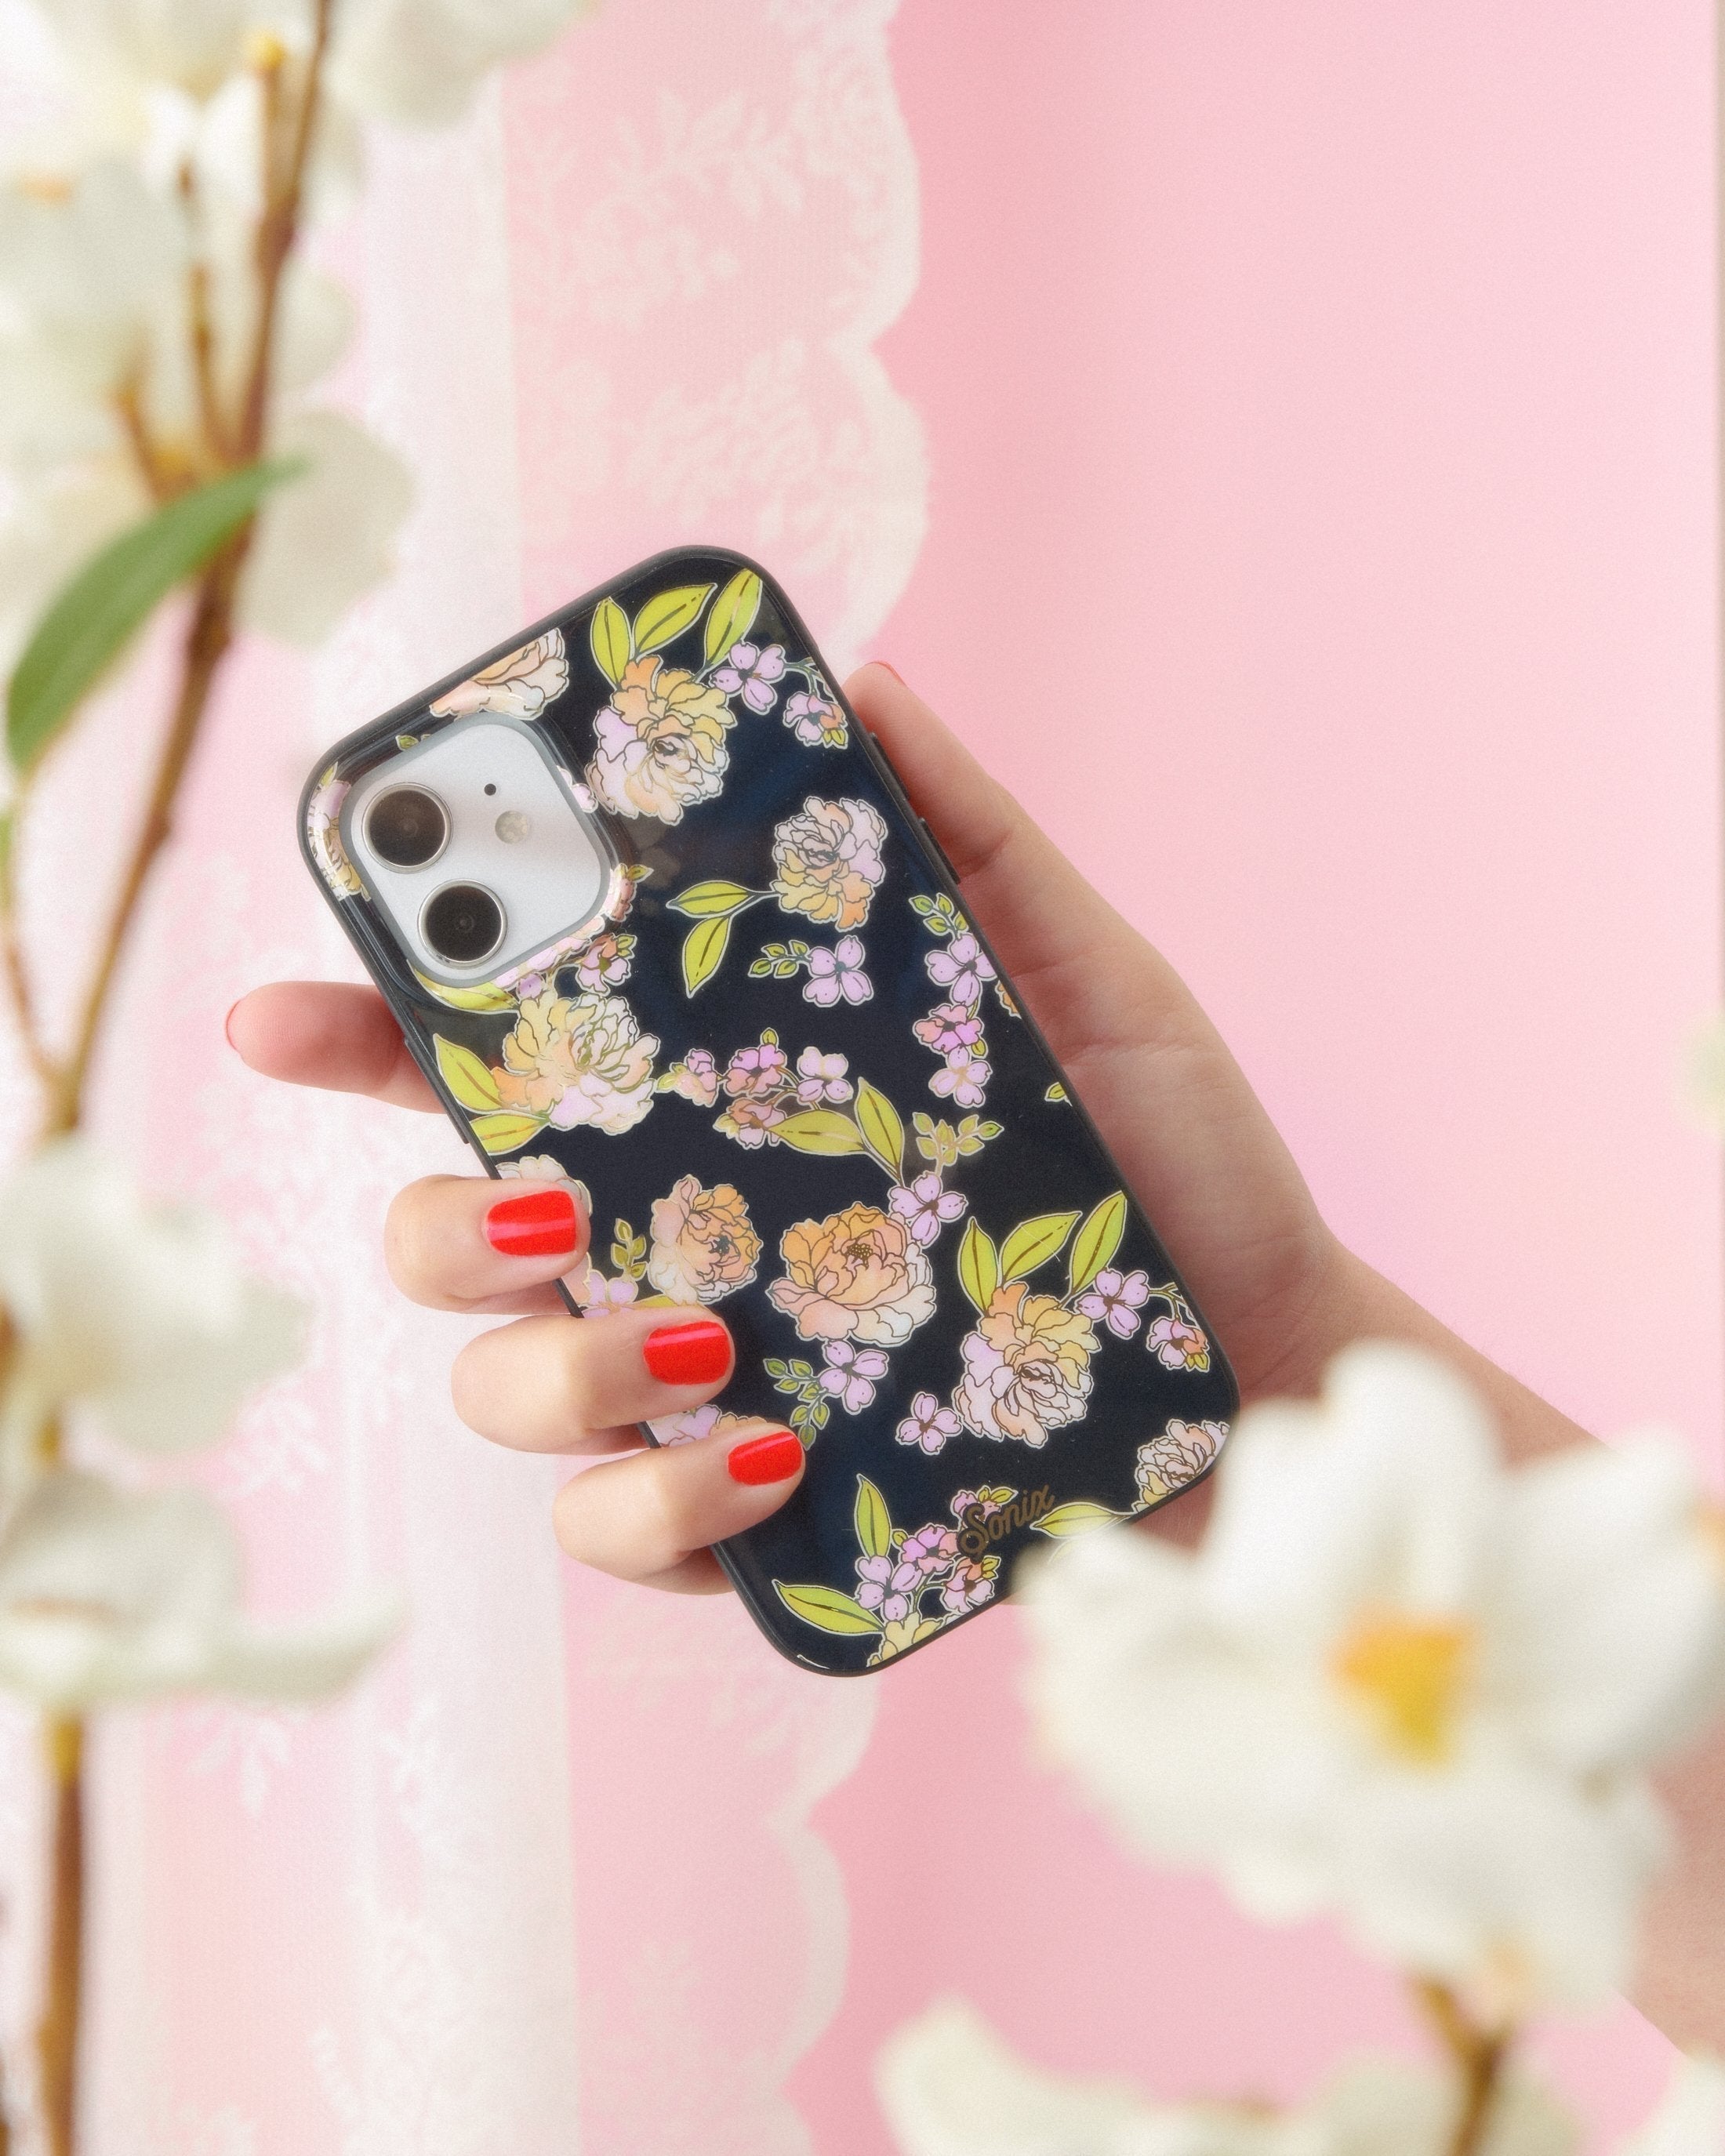 Black, iPhone case features a black base, gold foil details, and dainty flowers held by a hand with a pink background